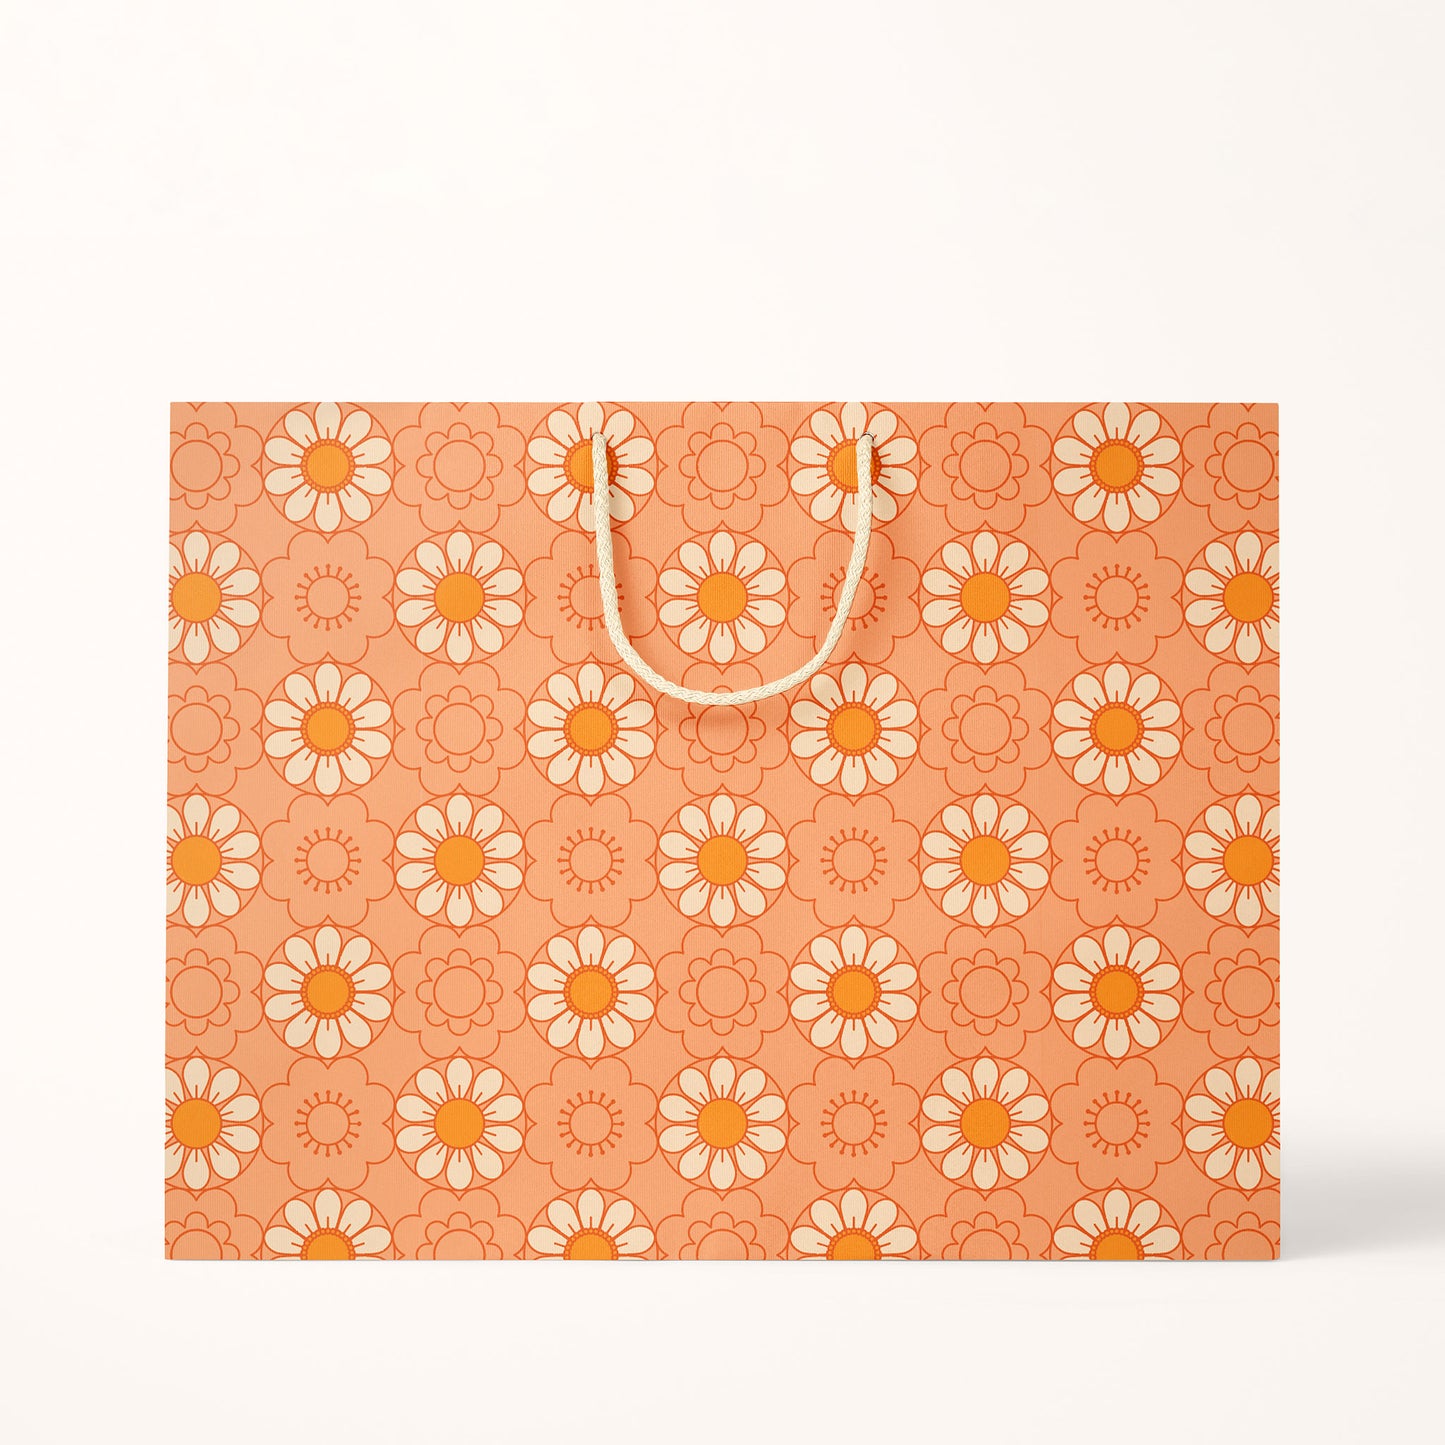 Two different sized paper gift bags with an orange background and a light yellow and orange repeating daisy print. They feature cotton string handles.